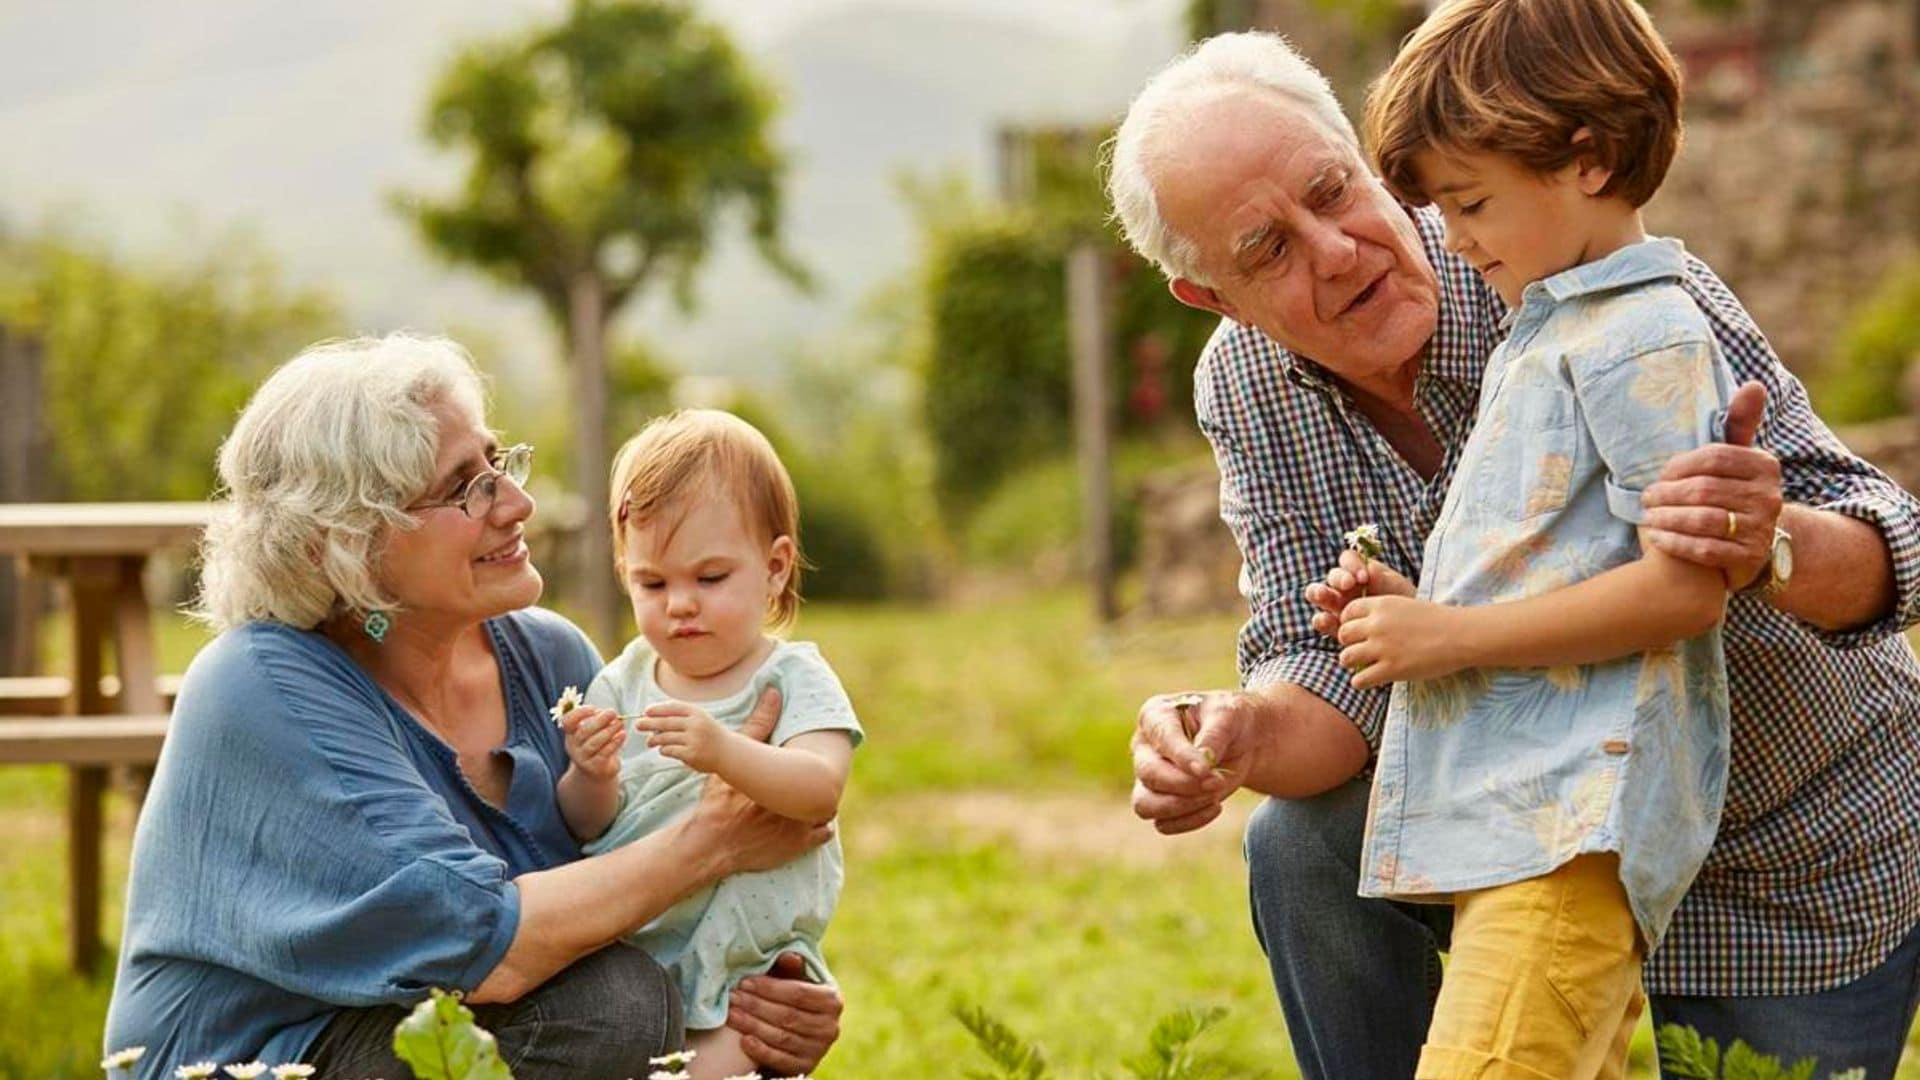 Kids prefer advice from their grandparents over their own parents